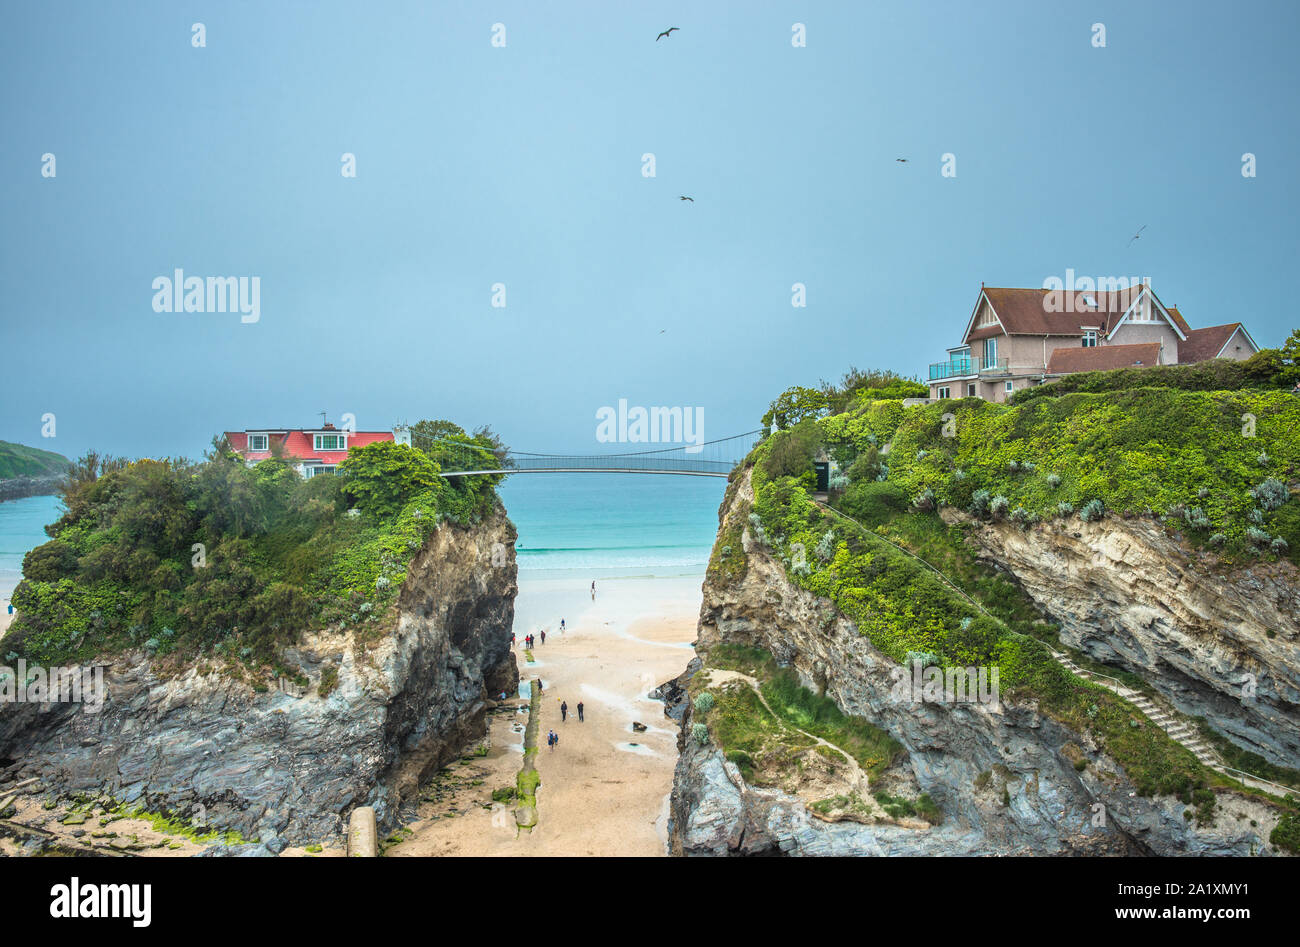 The House in the sea is a property accessed across a suspension bridge on Towan beach at Newquay in Cornwall, England, UK. Stock Photo